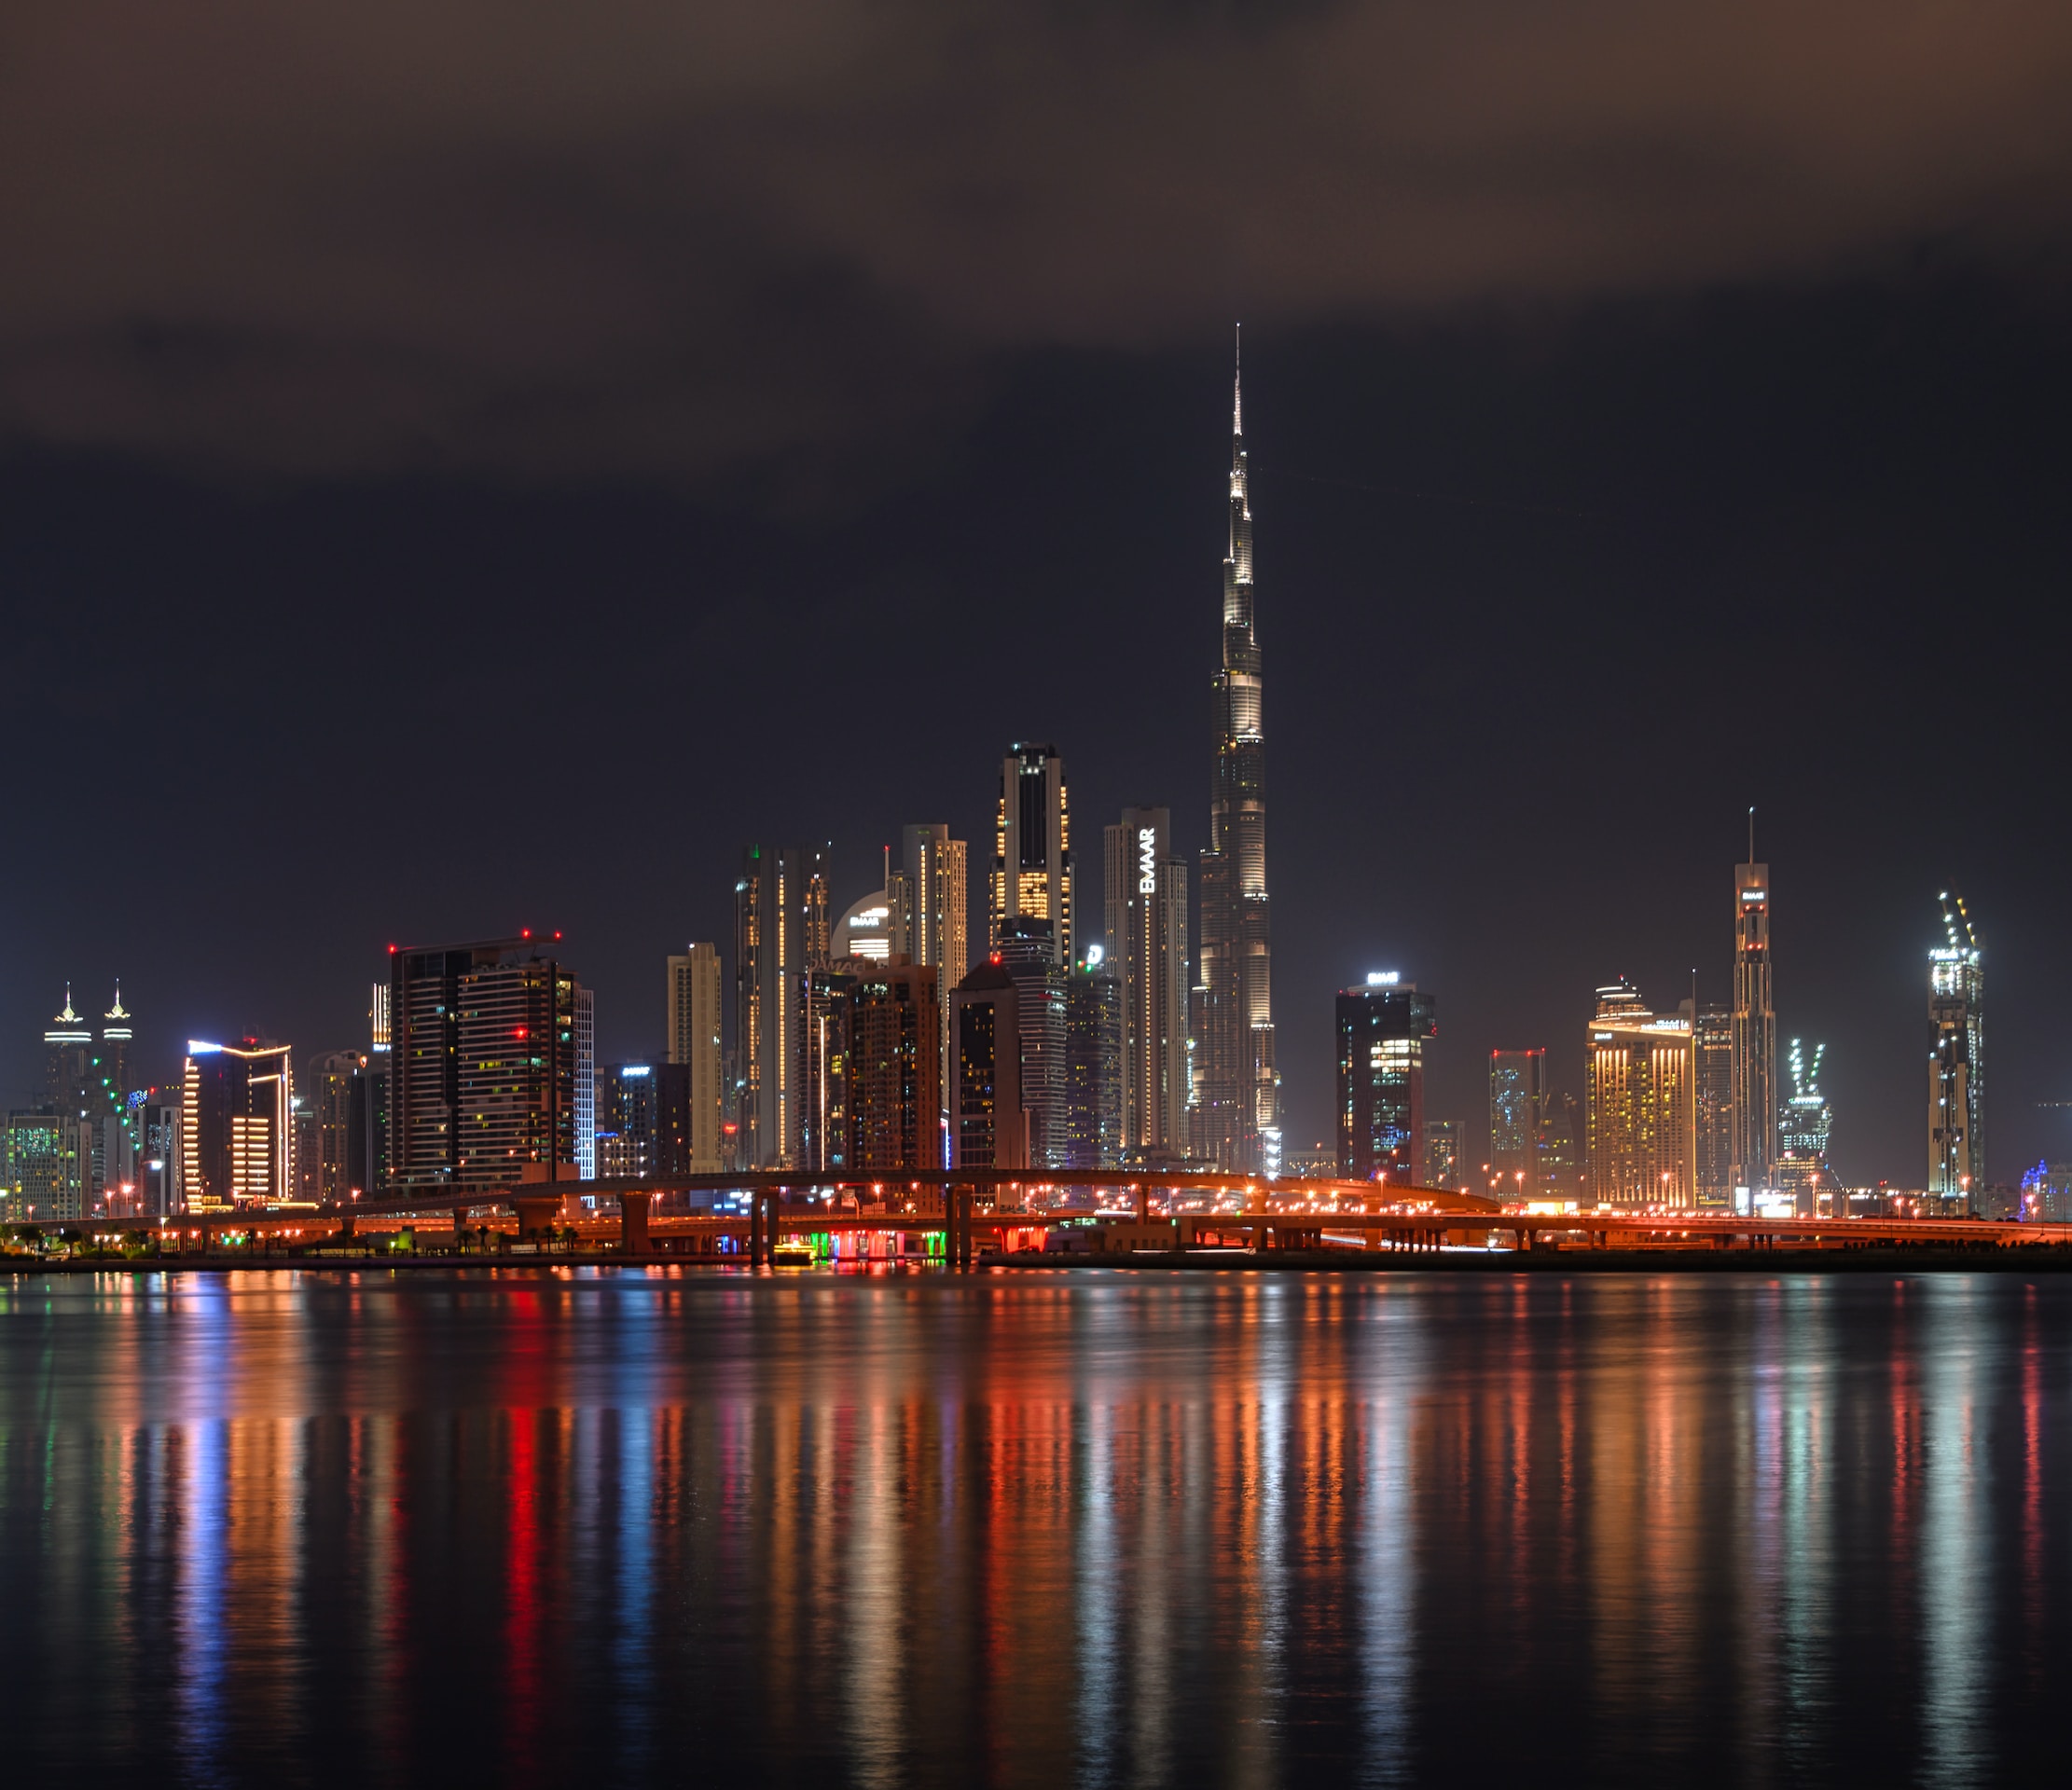 Who owns most of the real estate in Dubai?